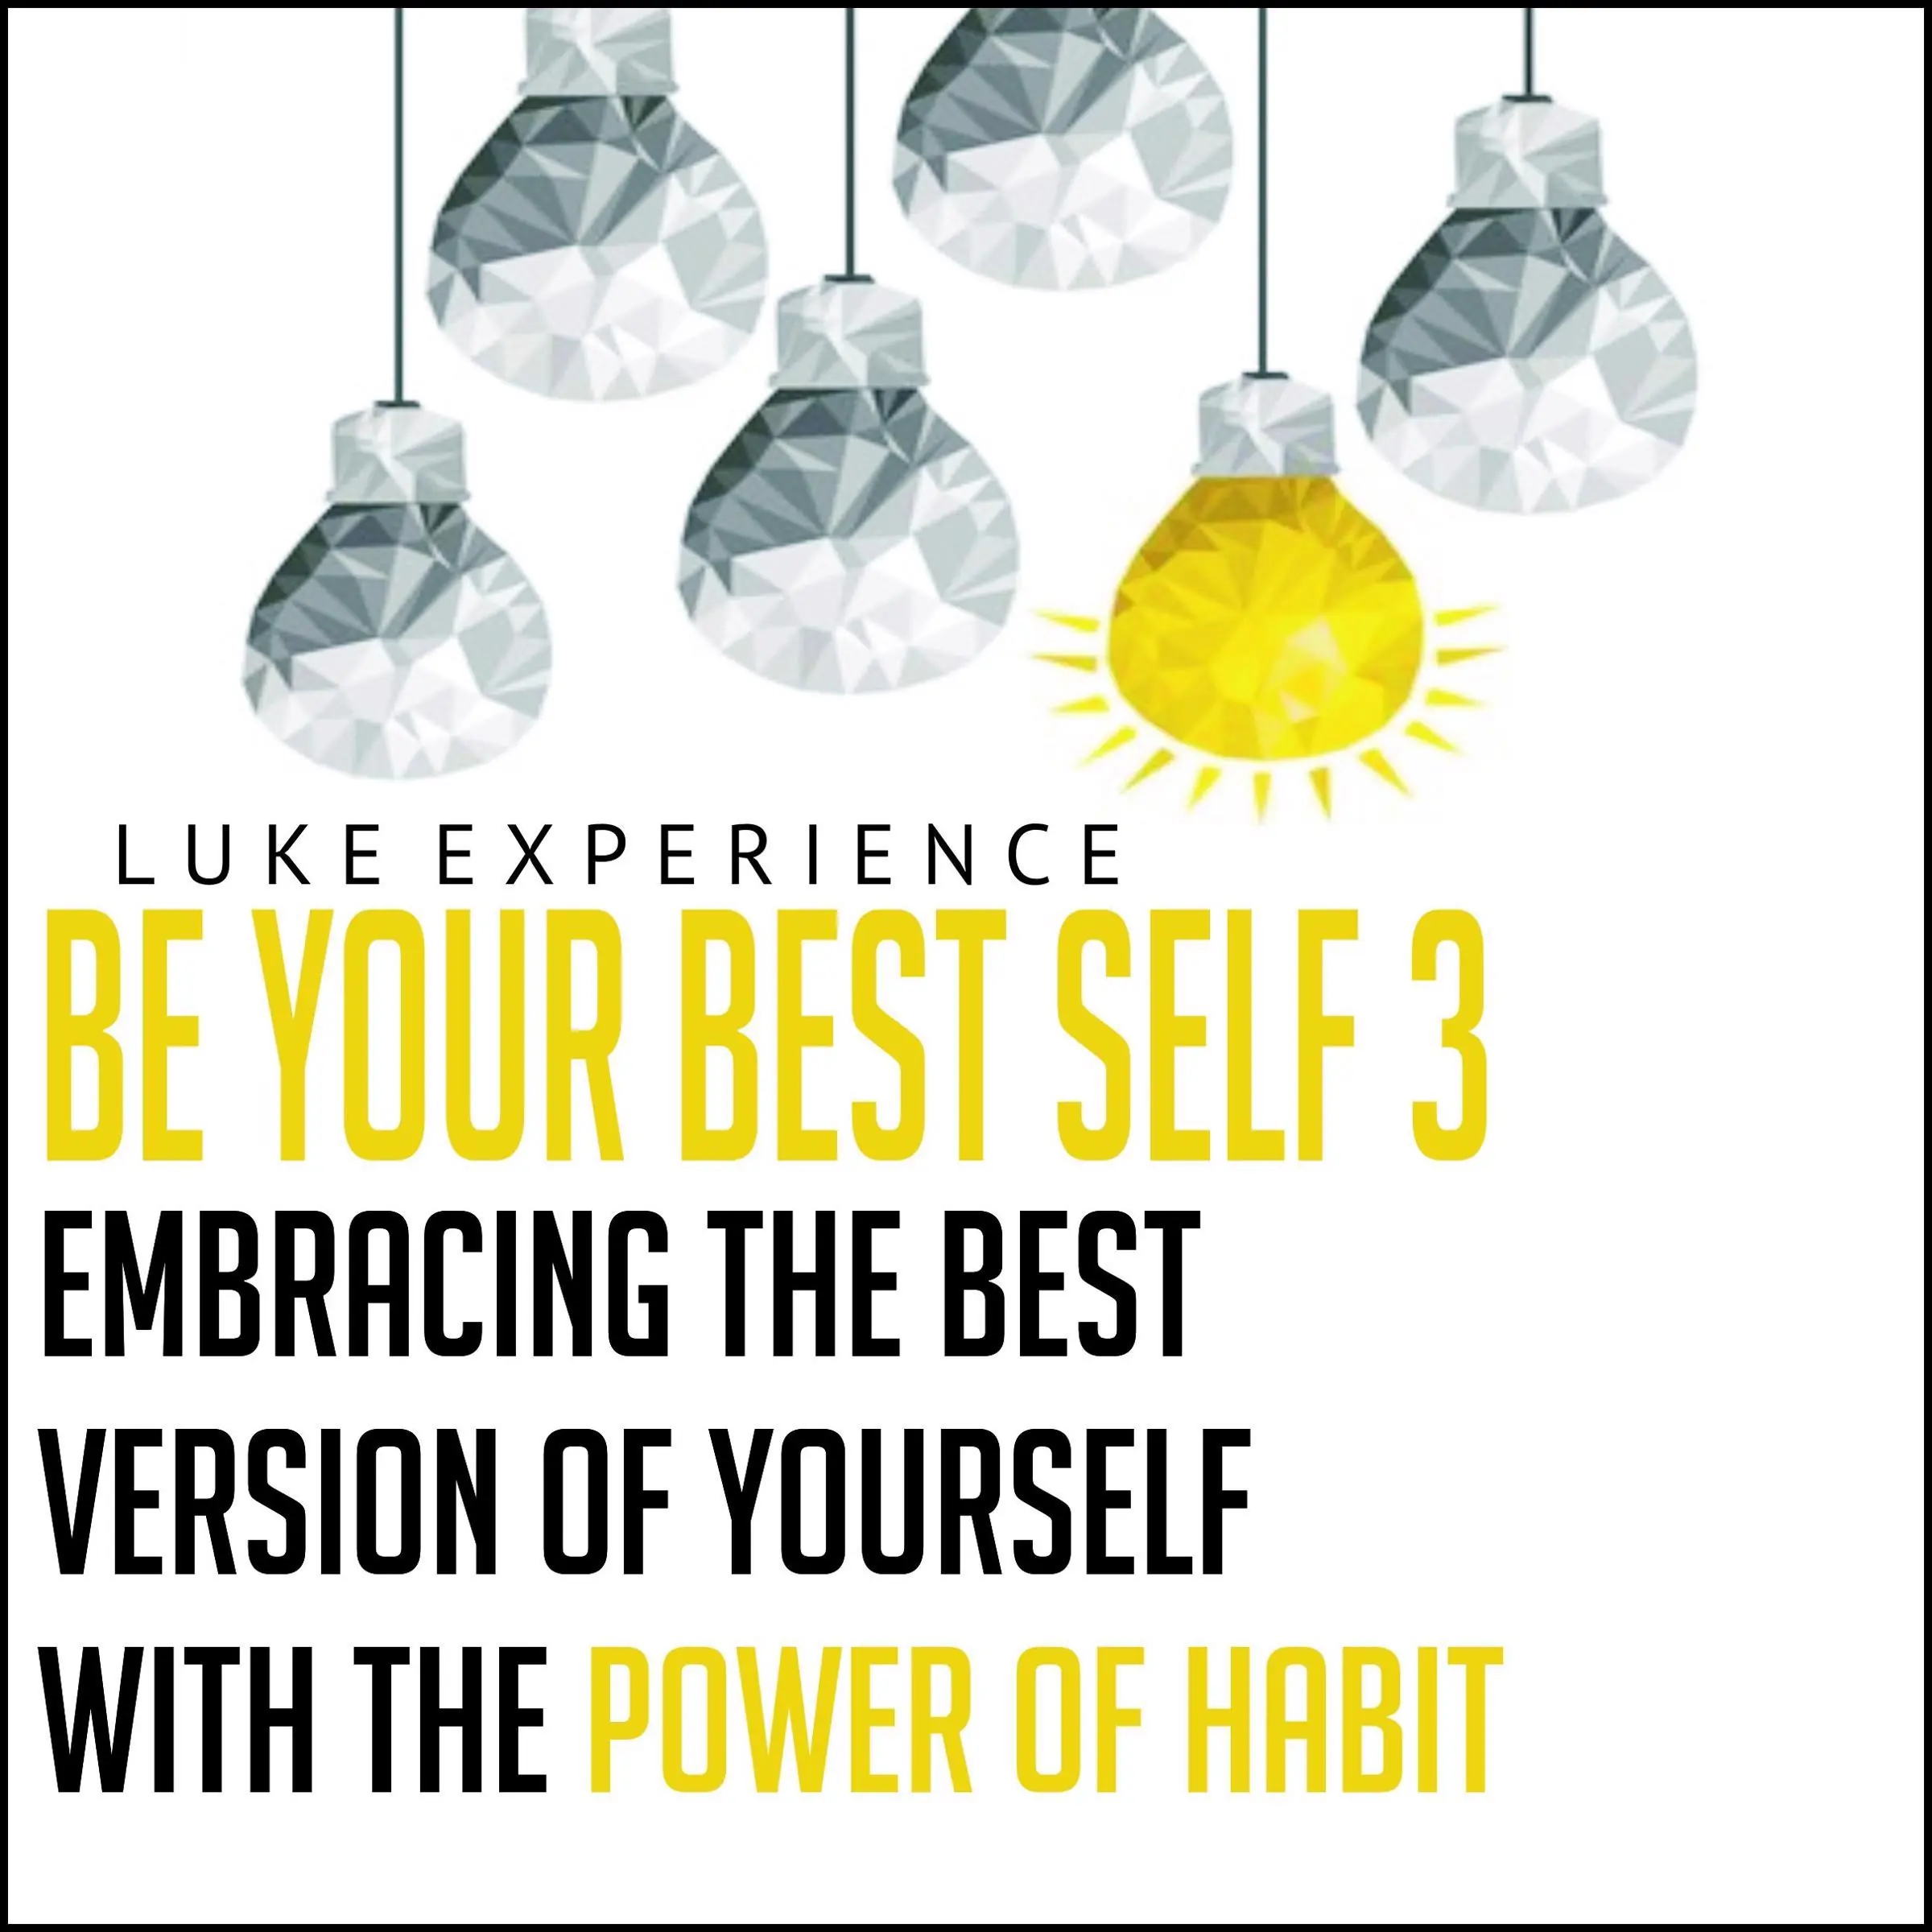 Be Your Best Self 3 Audiobook by Luke Experience